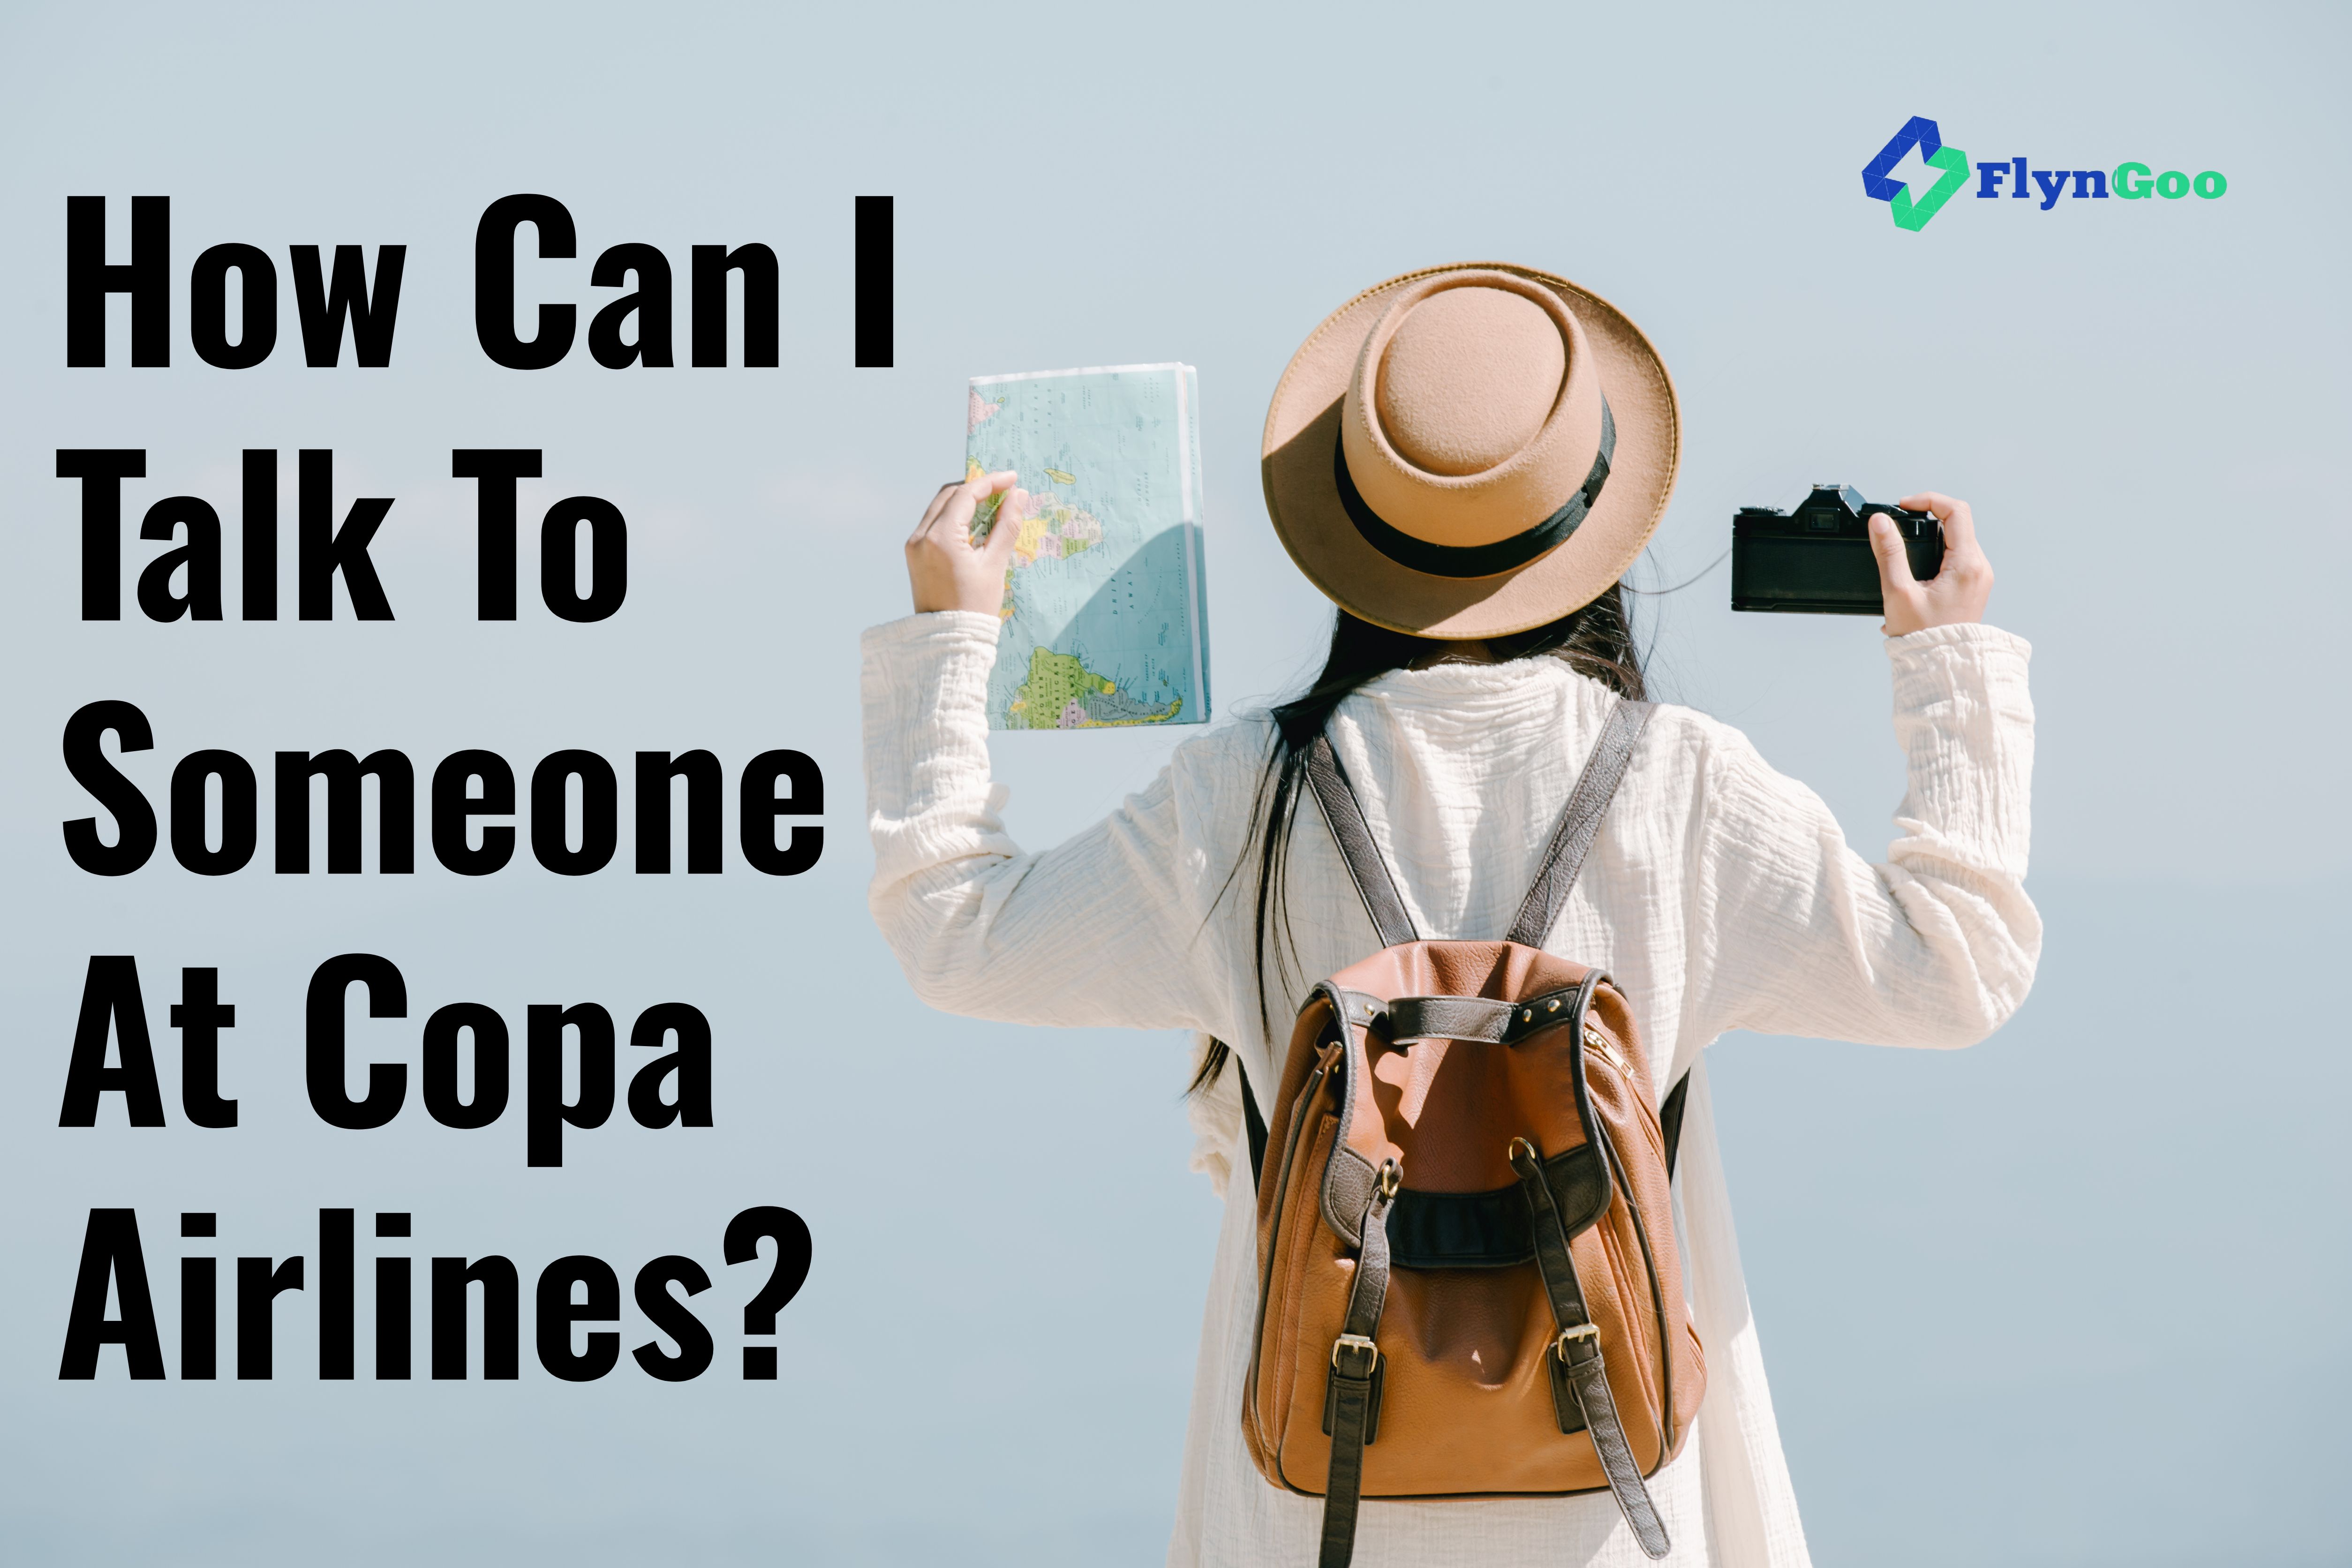 How Can I Talk To Someone At Copa Airlines?